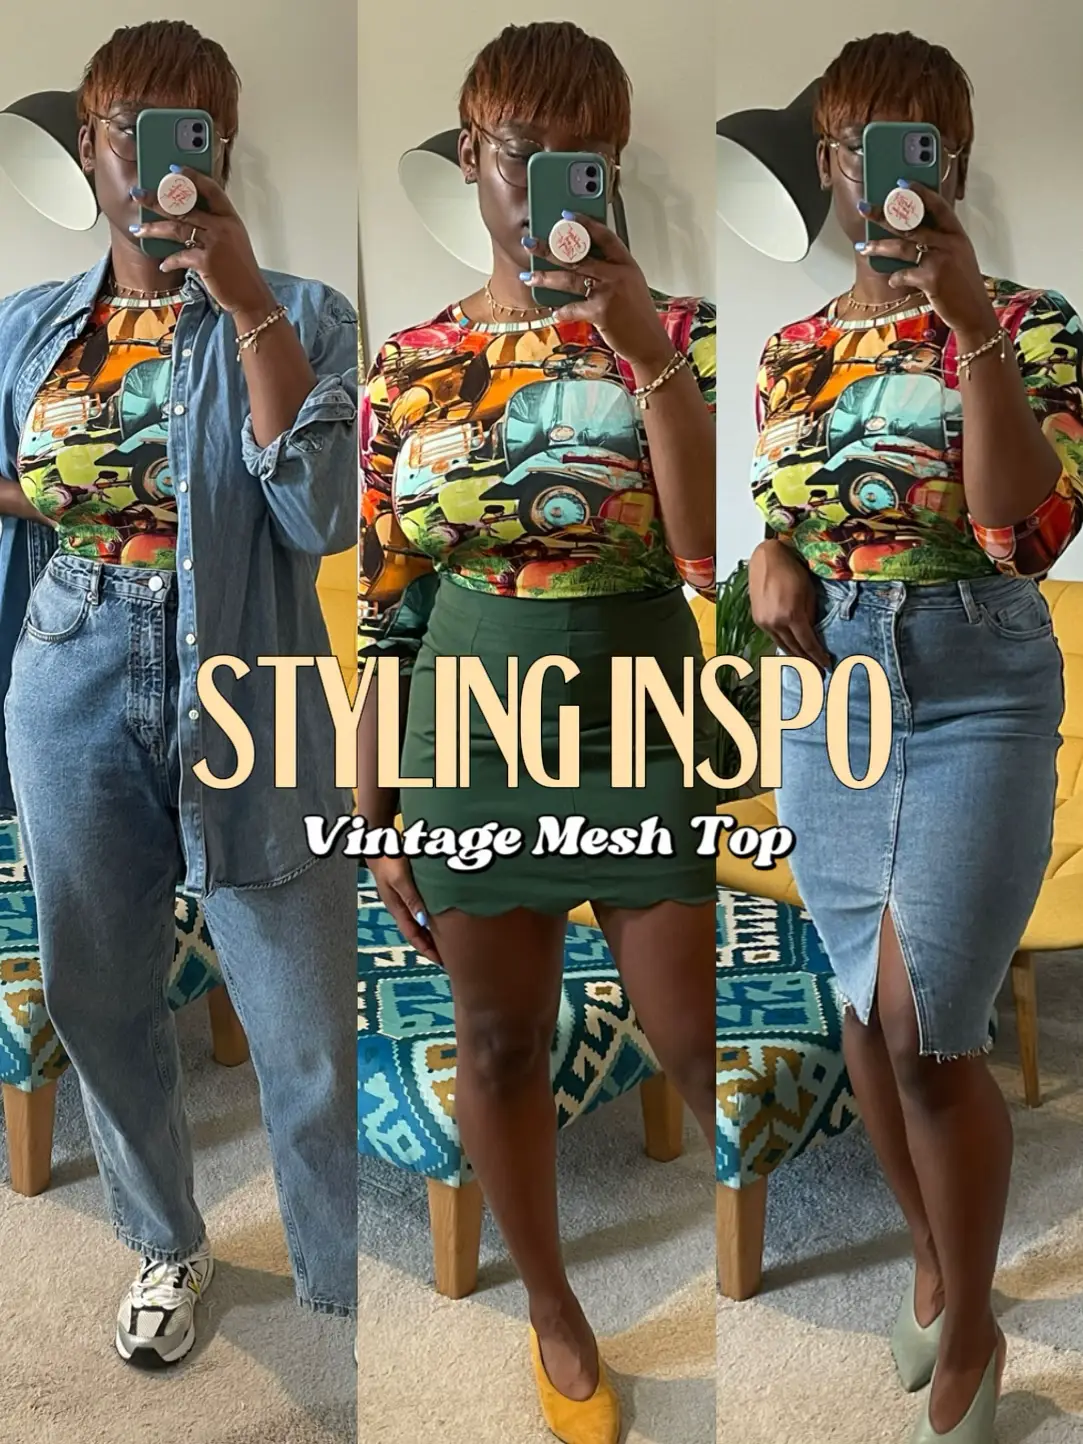 How to Style Mesh Tops, Gallery posted by nataliebrekka